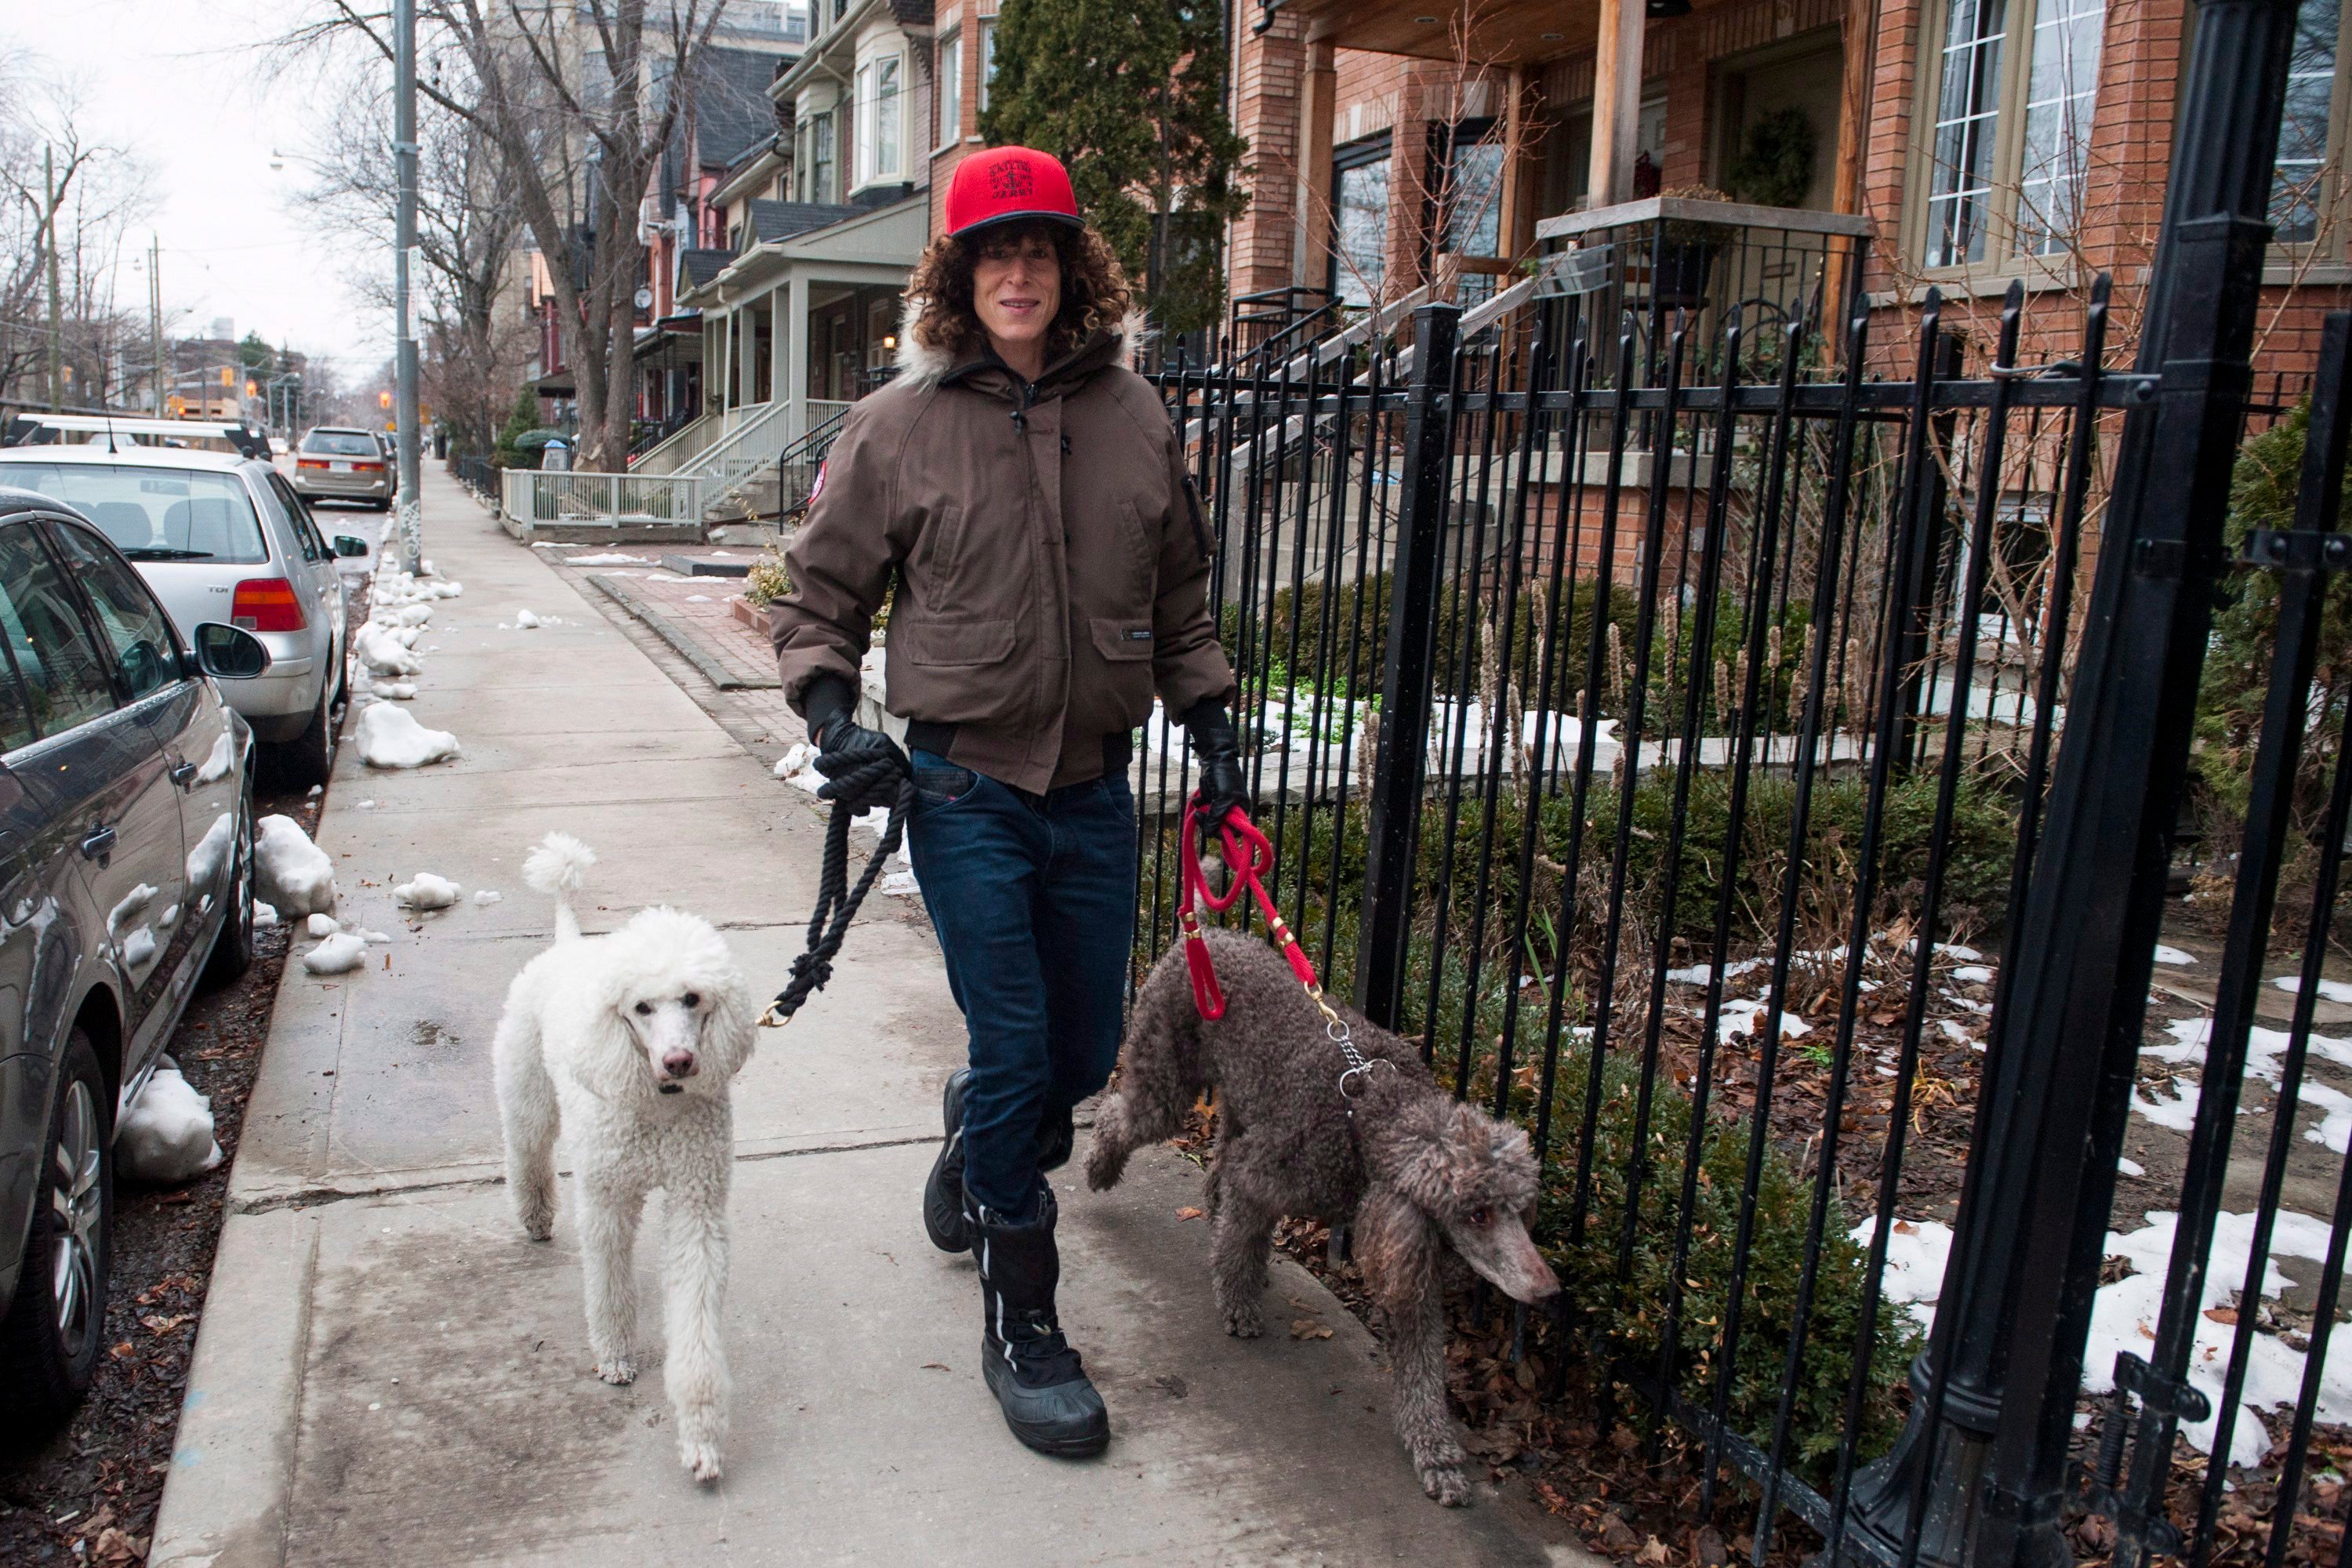 Andrea Constand, who has accused Bill Cosby of sexually assaulting her, walks her dogs in Toronto Thursday, Dec. 31, 2015.